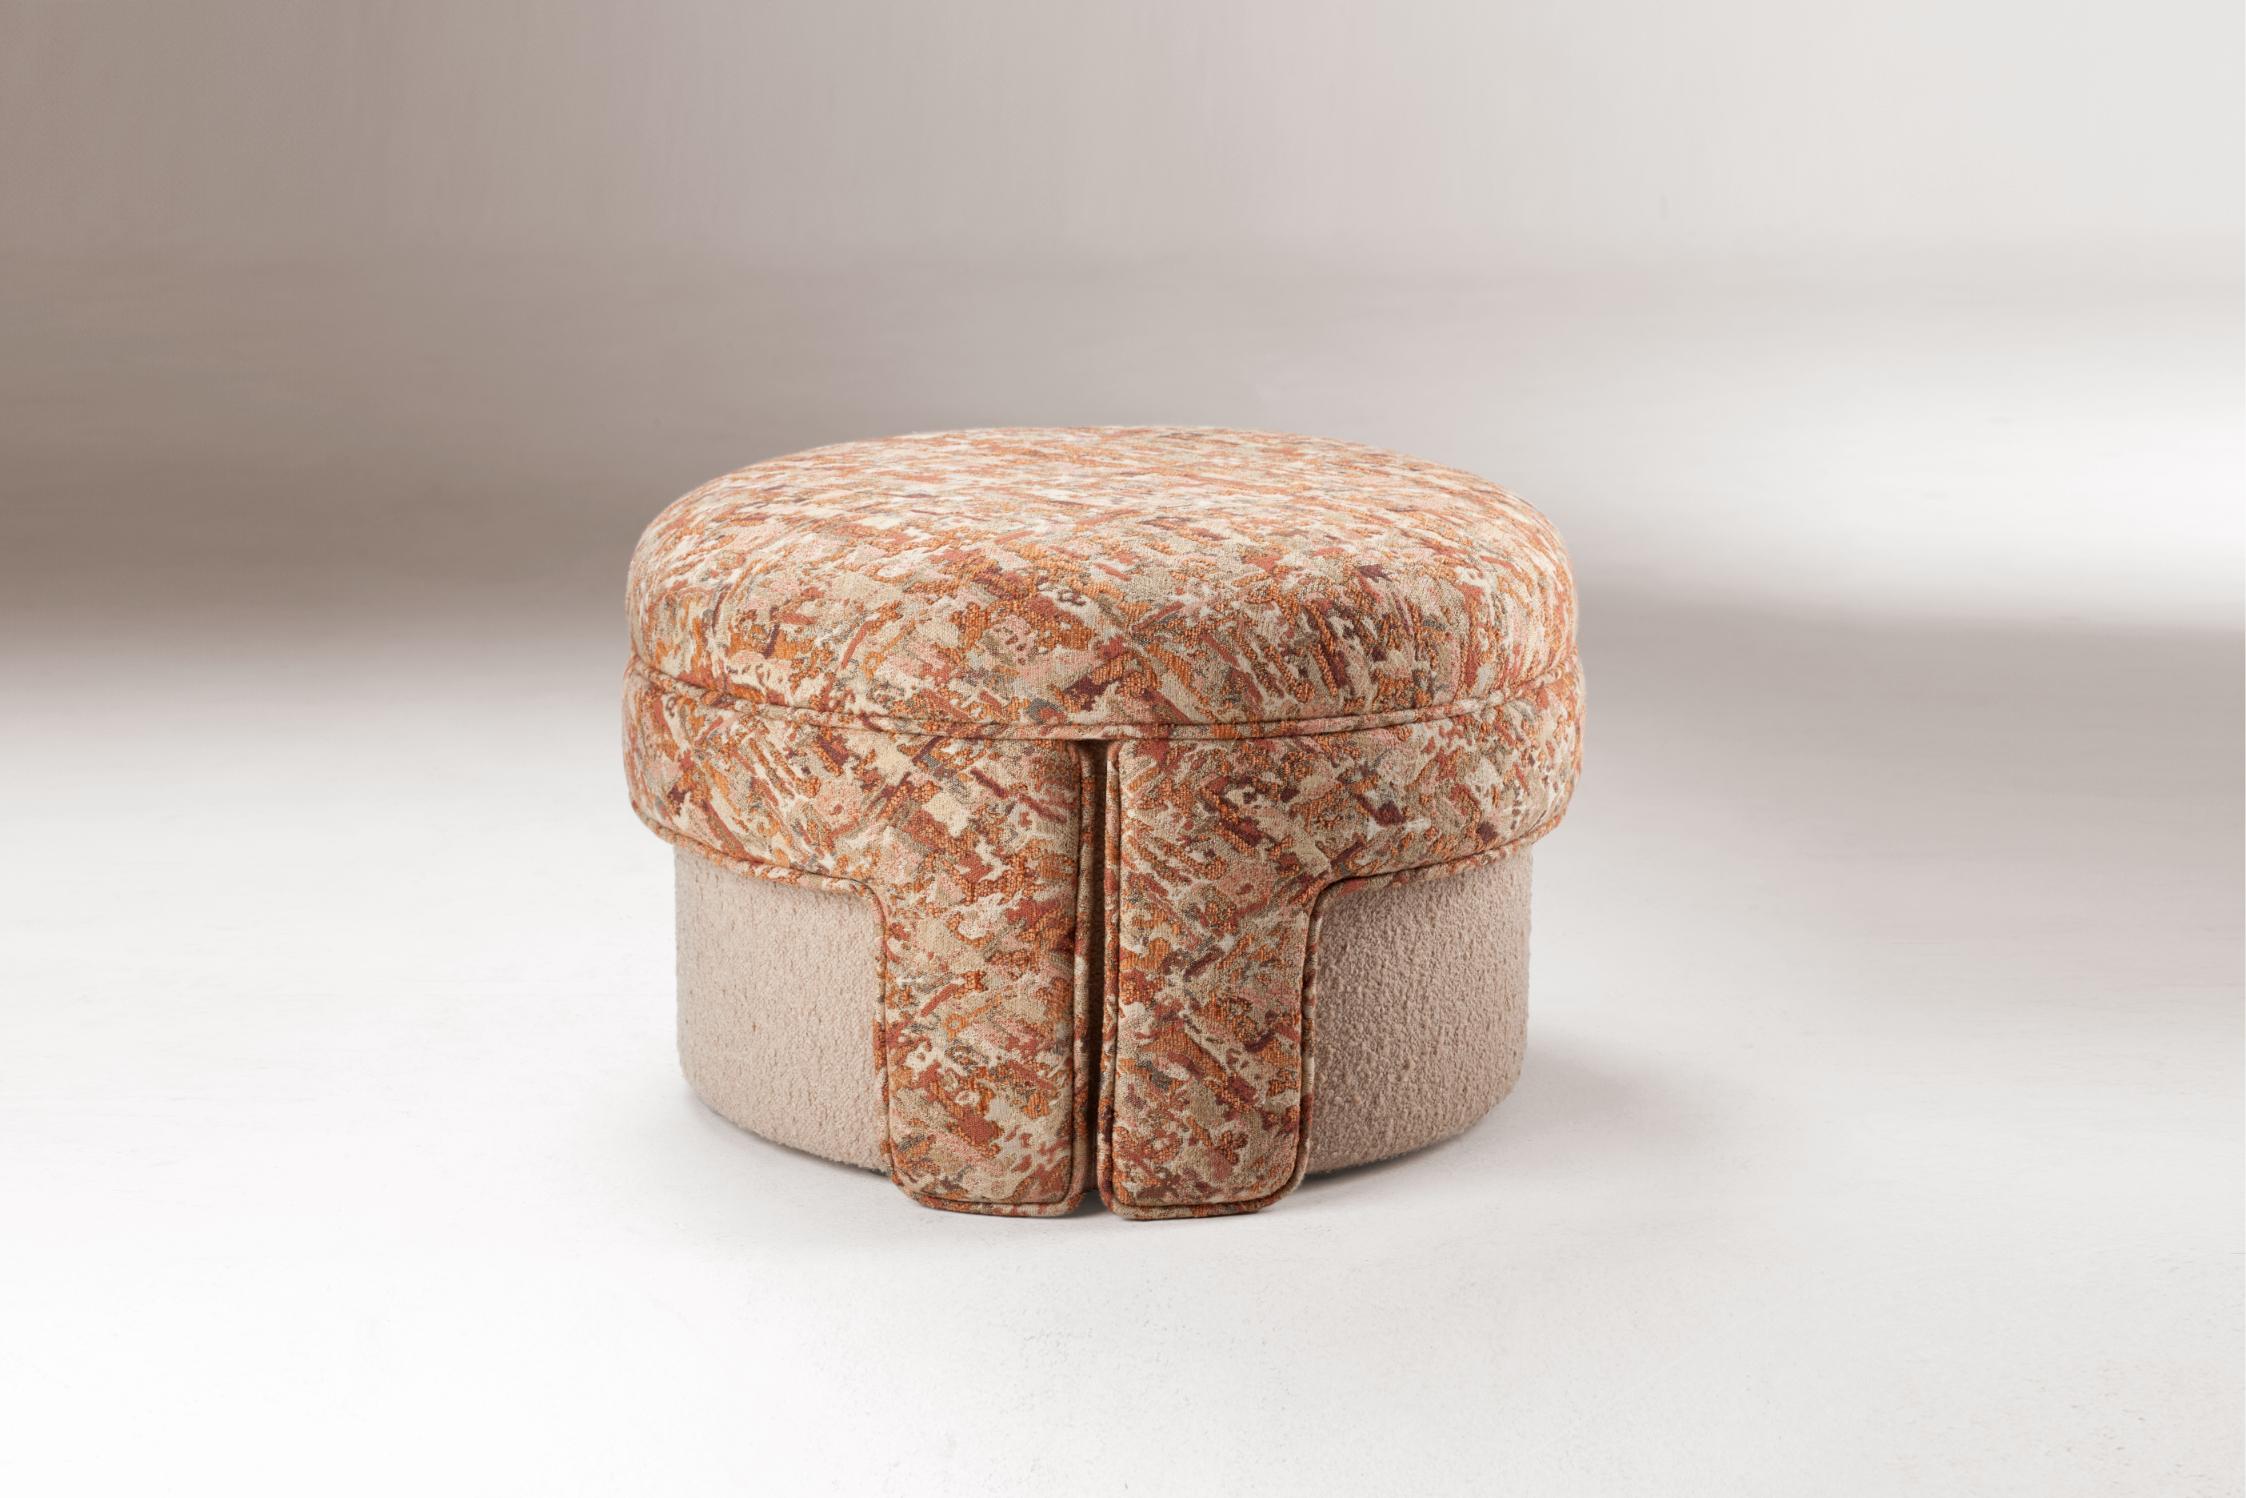 L'unite pouf by Dooq
Dimensions: ø 64 x H 44 cm
Materials: Upholstery.


Dooq is a design company dedicated to celebrate the luxury of living. Creating designs that stimulate the senses, whose conceptual approach is inspired on the unexpected